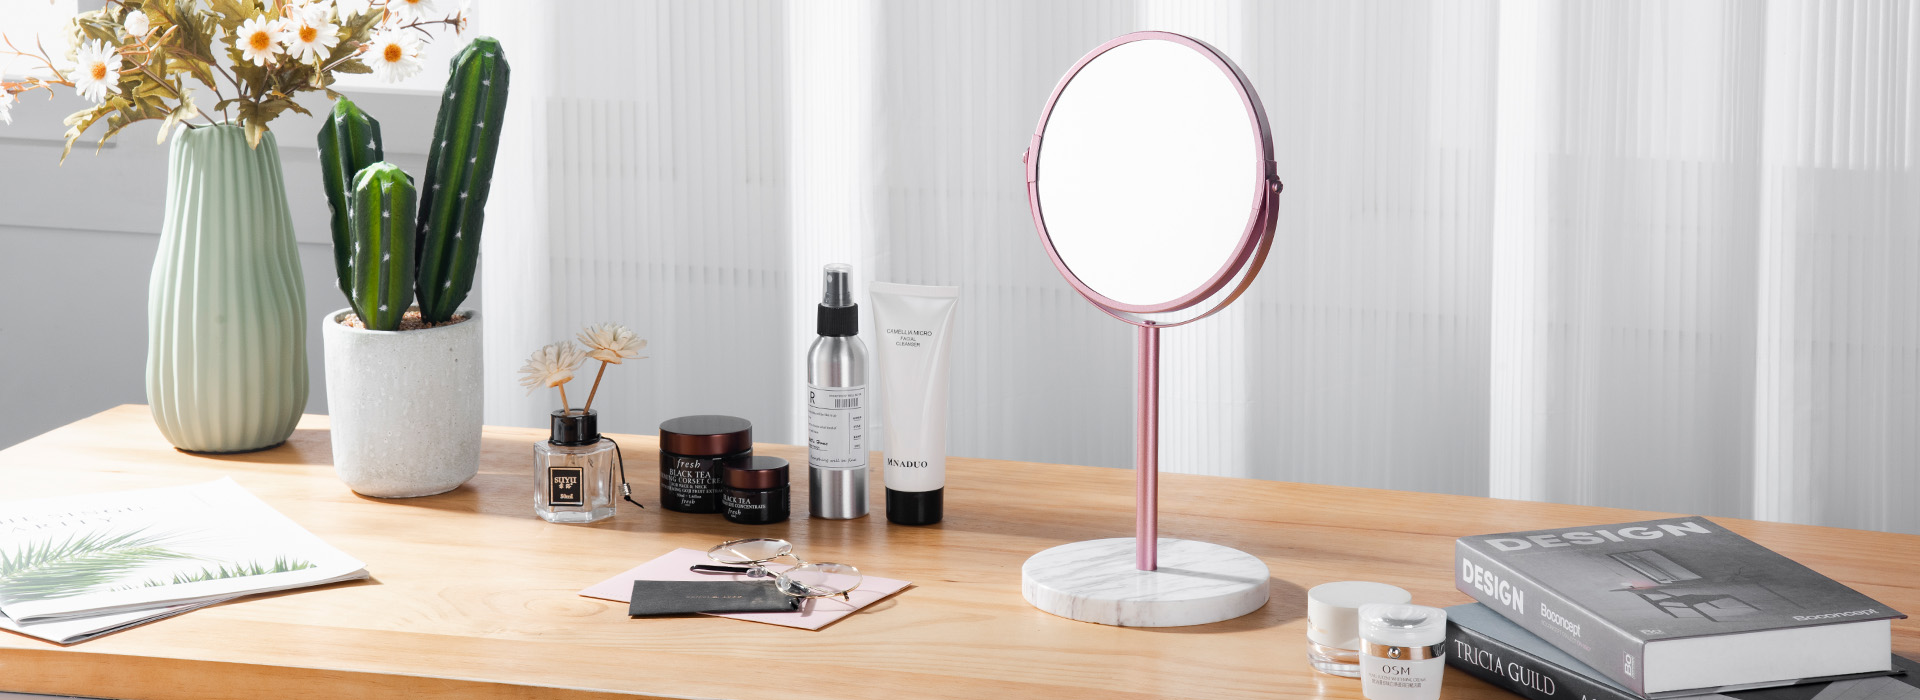 makeup mirror in Dressing table